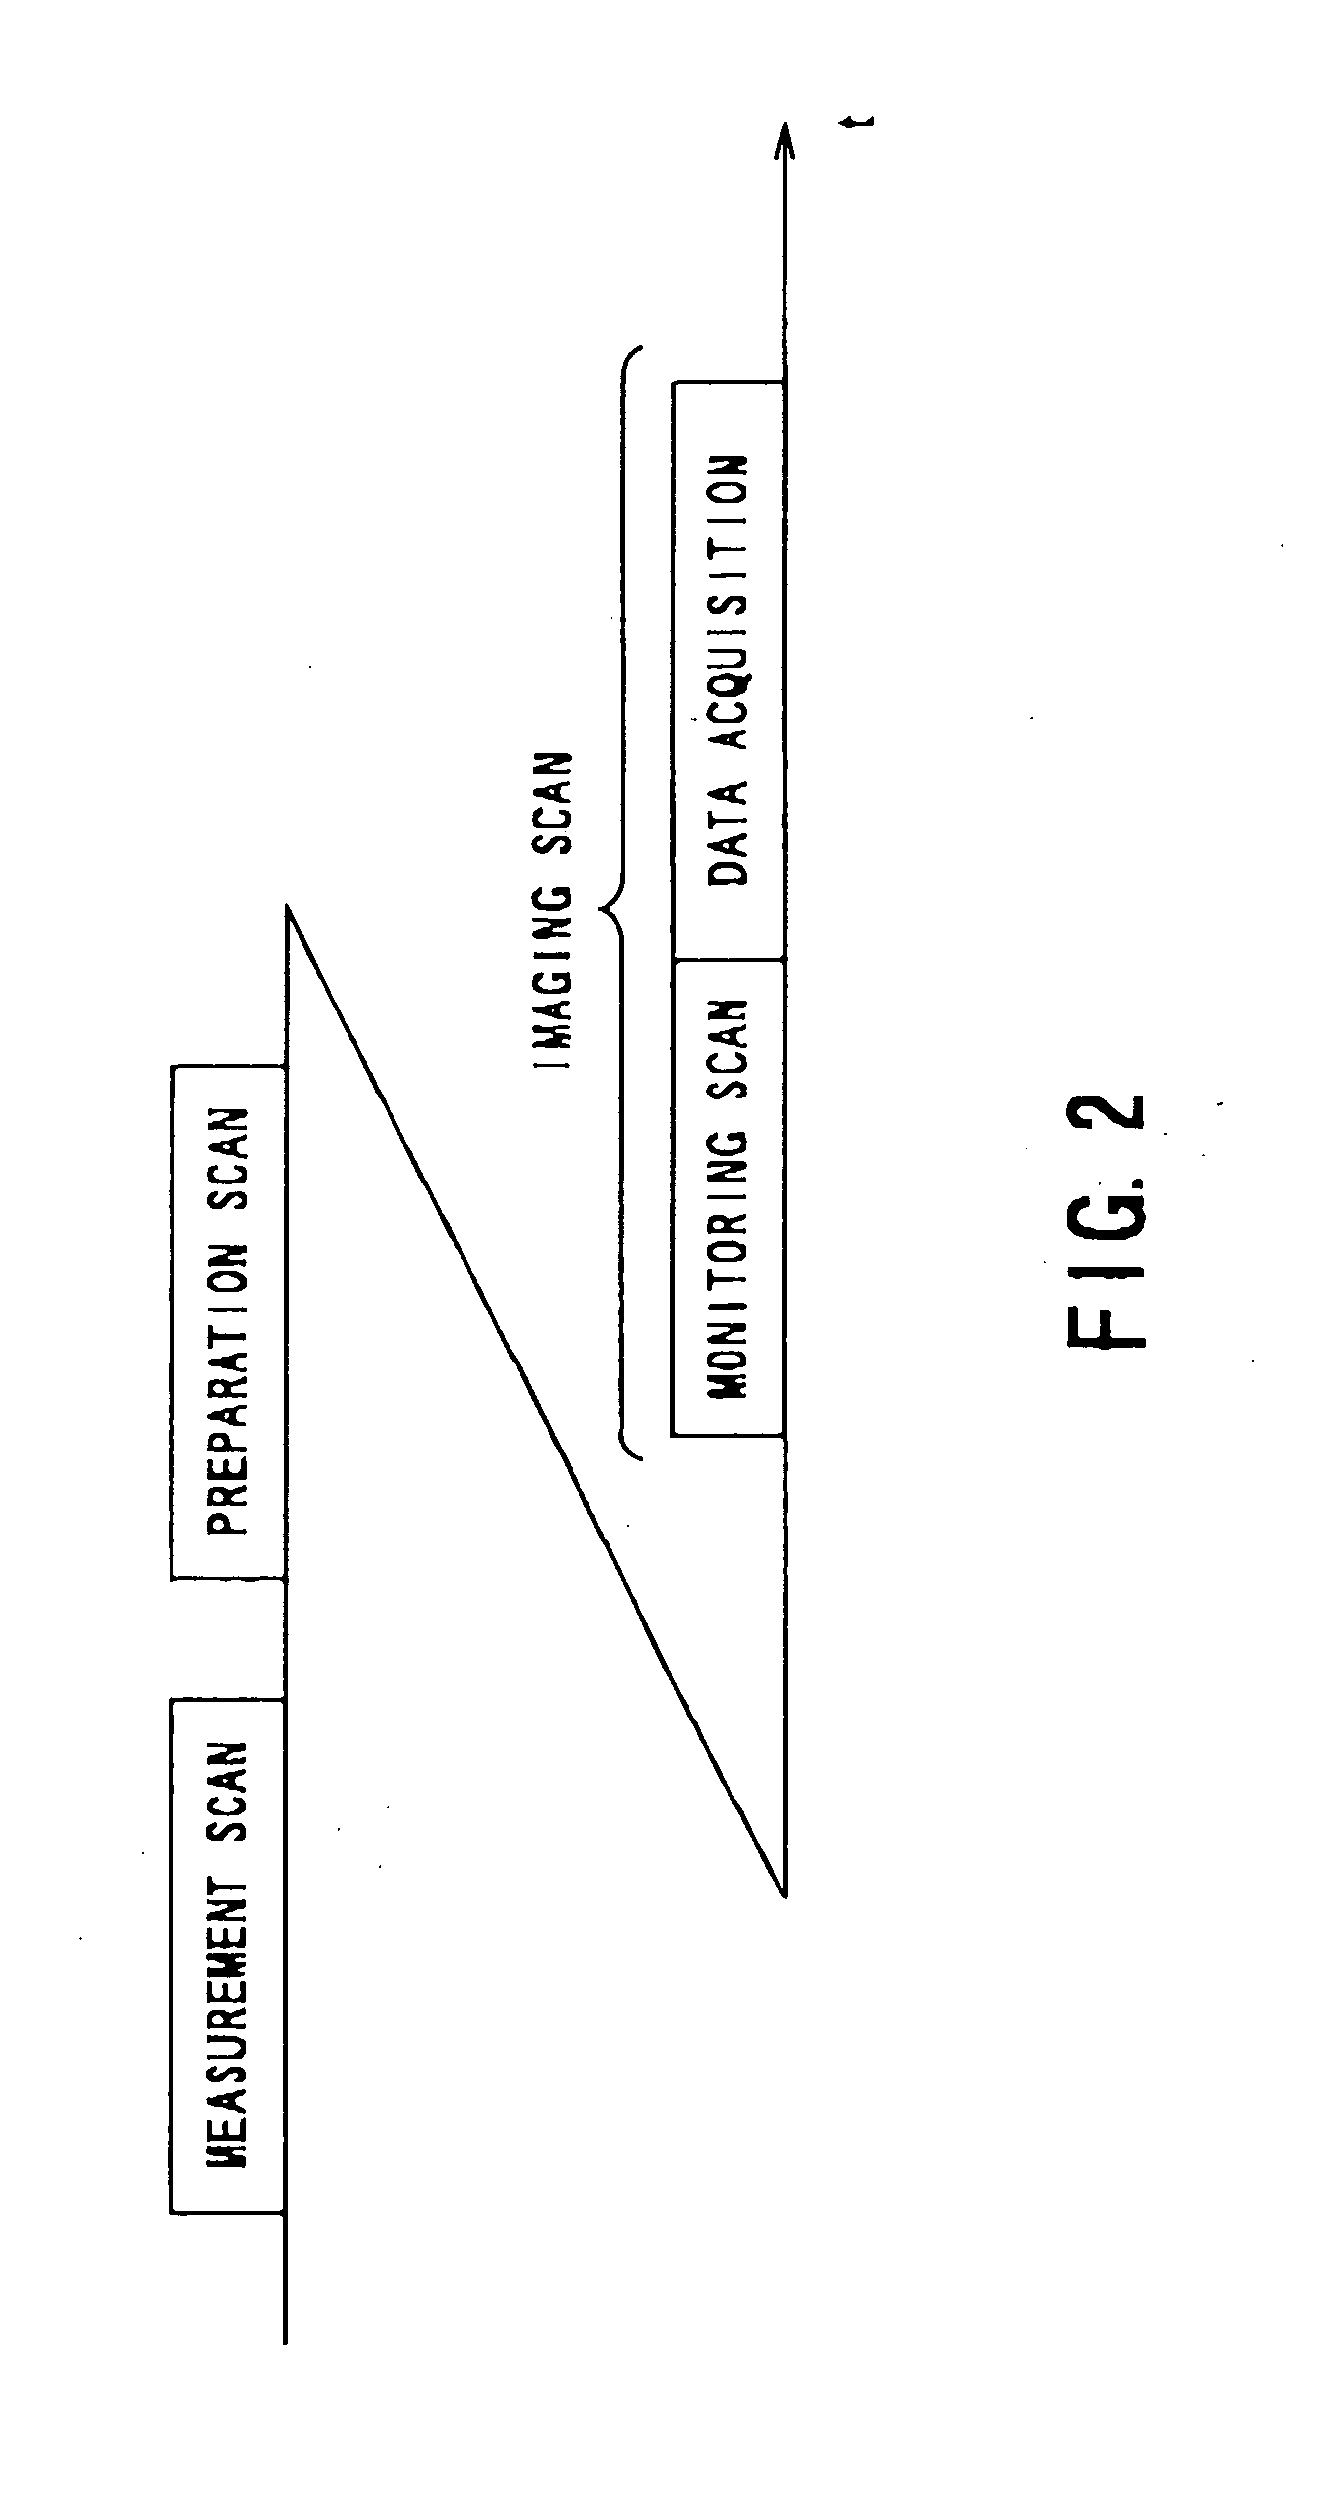 Magnetic resonance imaging system for non-contrast MRA and magnetic resonance signal acquisition method employed by the same